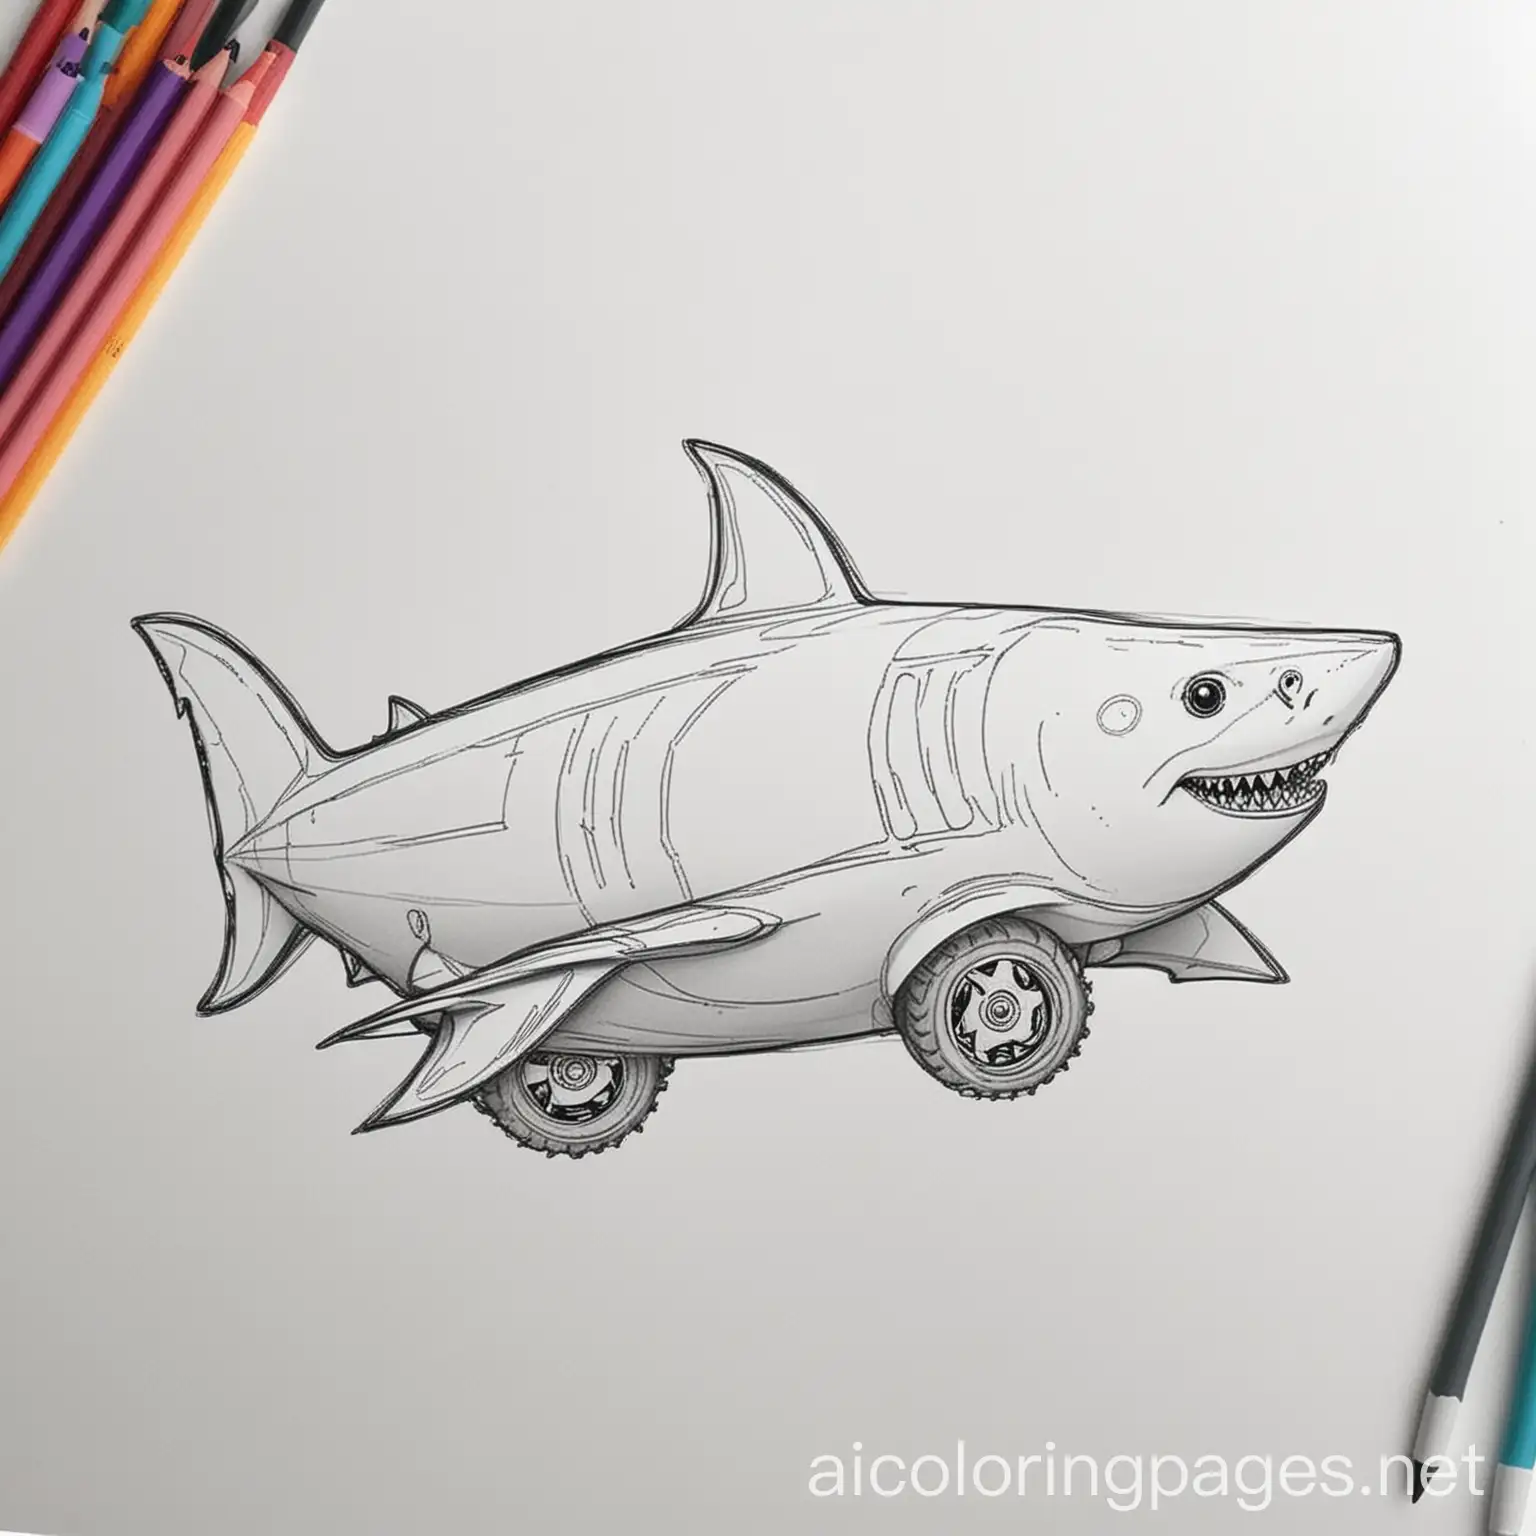 Shark-Shaped-Car-Coloring-Page-in-Black-and-White